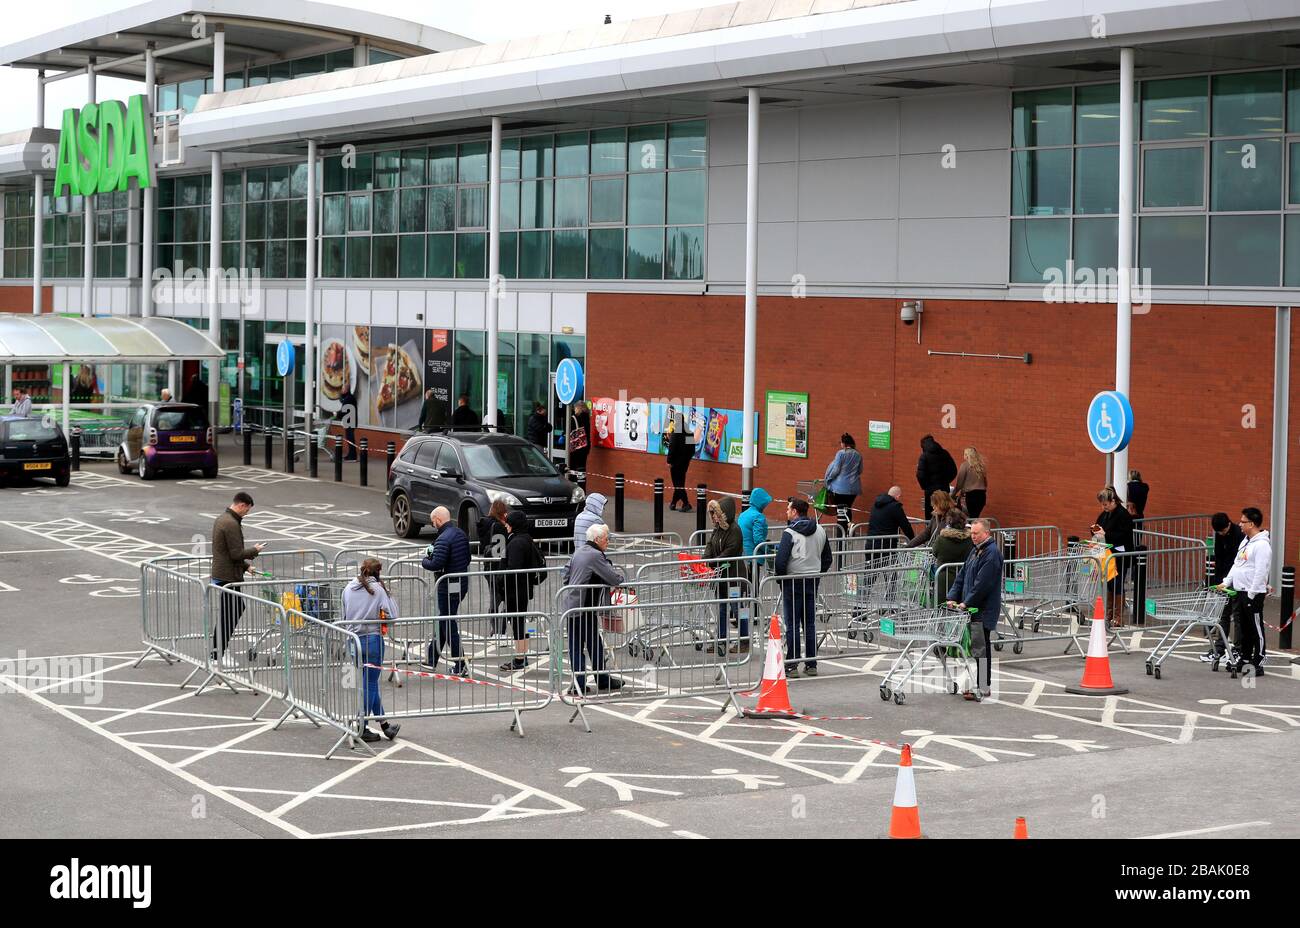 Members of the public observe social distancing measures whilst they queue for Asda in Grantham, Lincolnshire as the UK continues in lockdown to help curb the spread of the coronavirus. Stock Photo